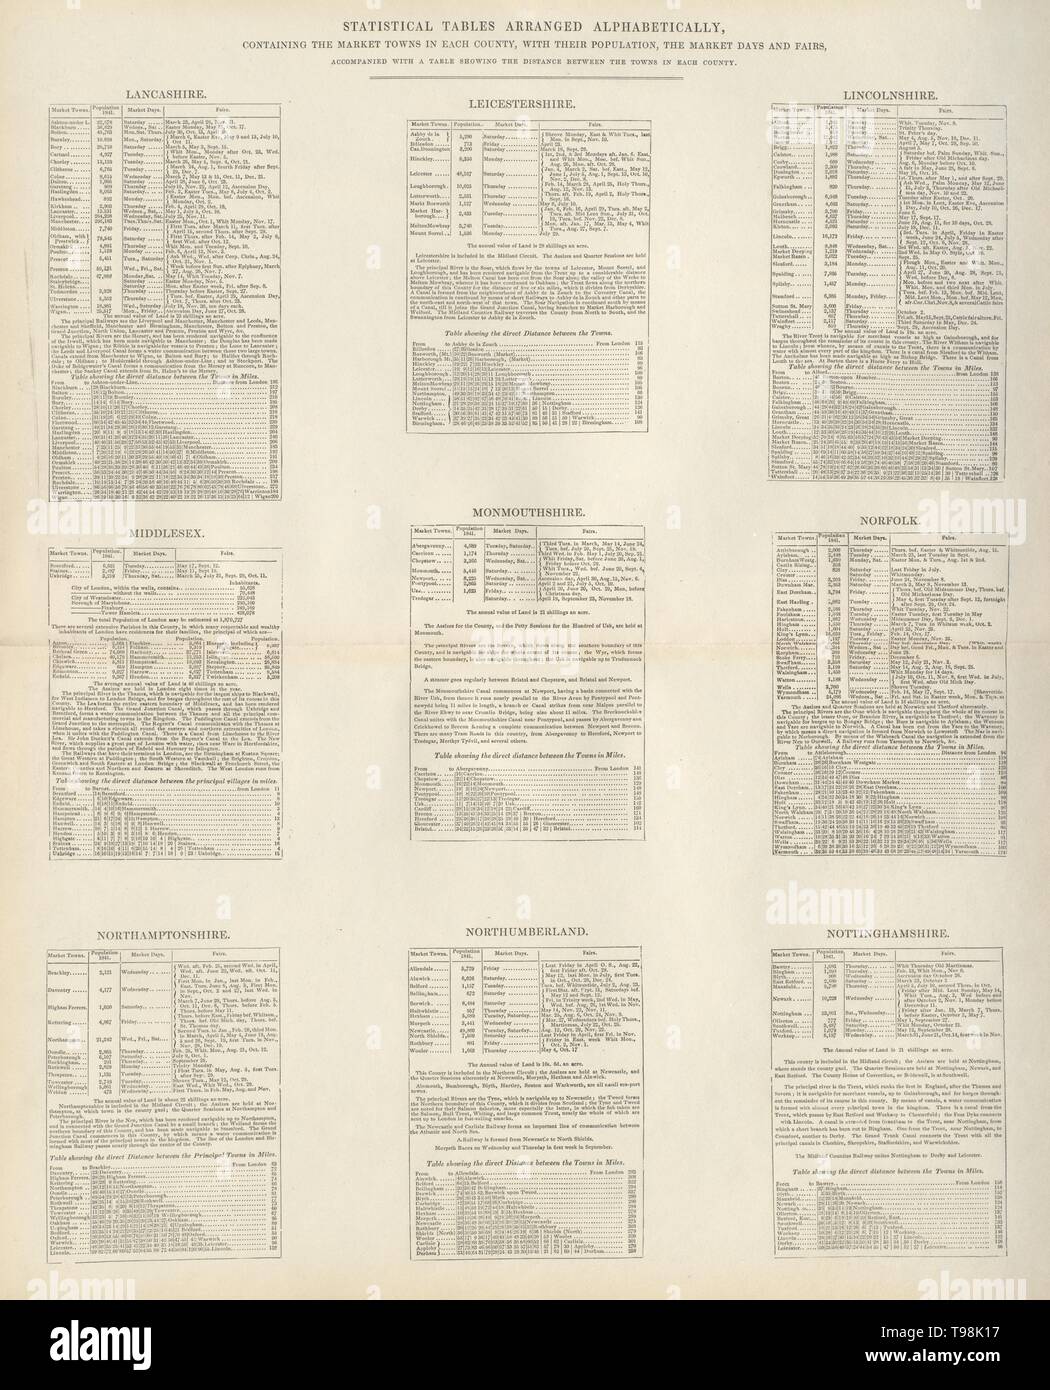 Market Towns, days, fairs & population by county Lancashire-Nottinghamshire 1868 Stock Photo